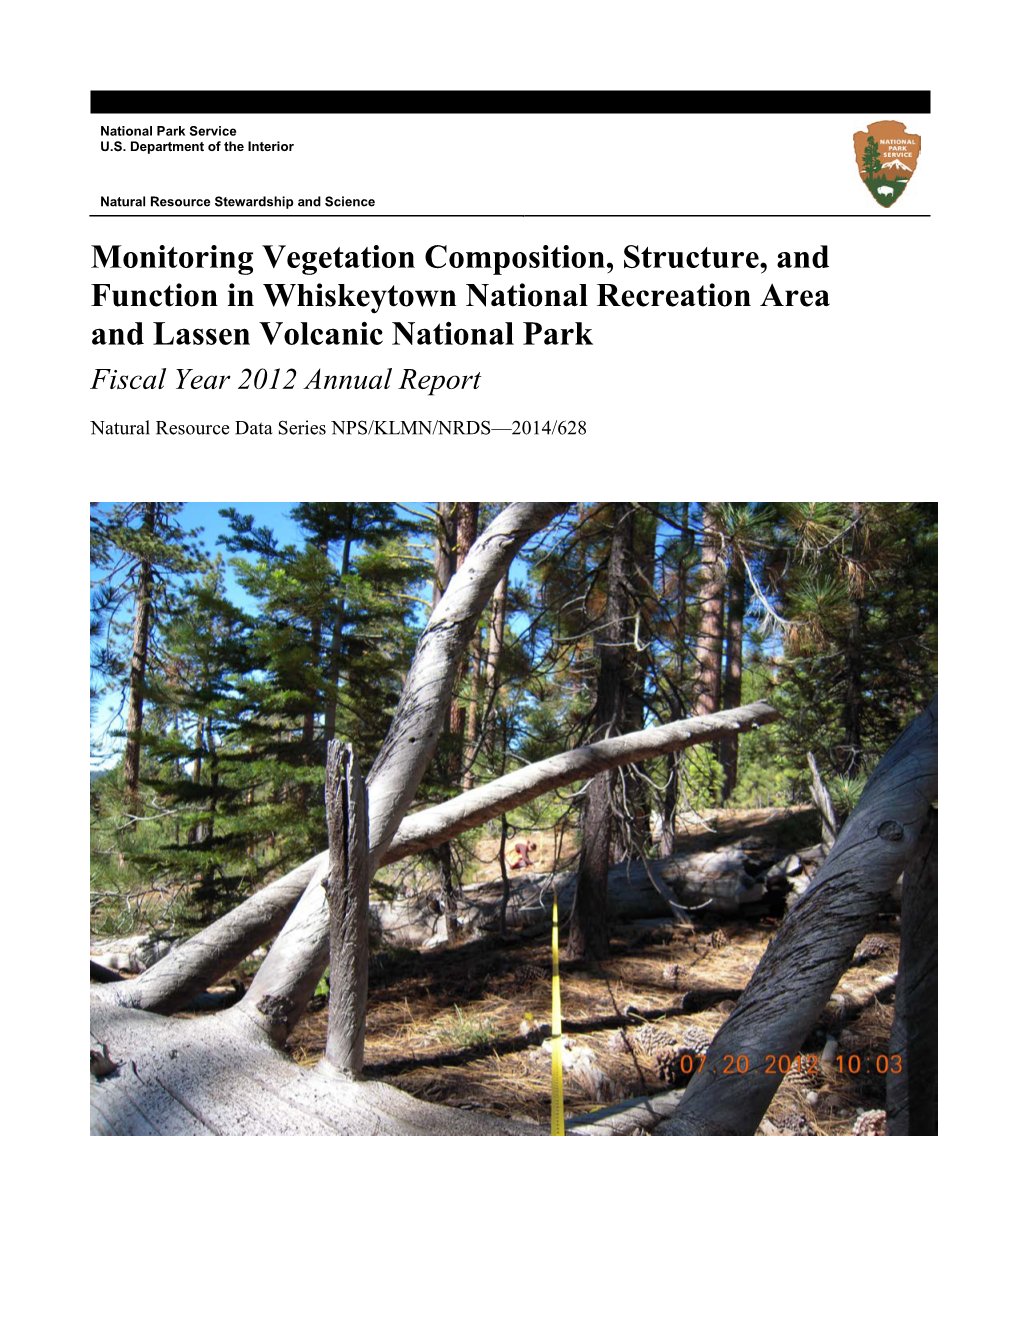 Monitoring Vegetation Composition, Structure, and Function in Whiskeytown National Recreation Area and Lassen Volcanic National Park Fiscal Year 2012 Annual Report